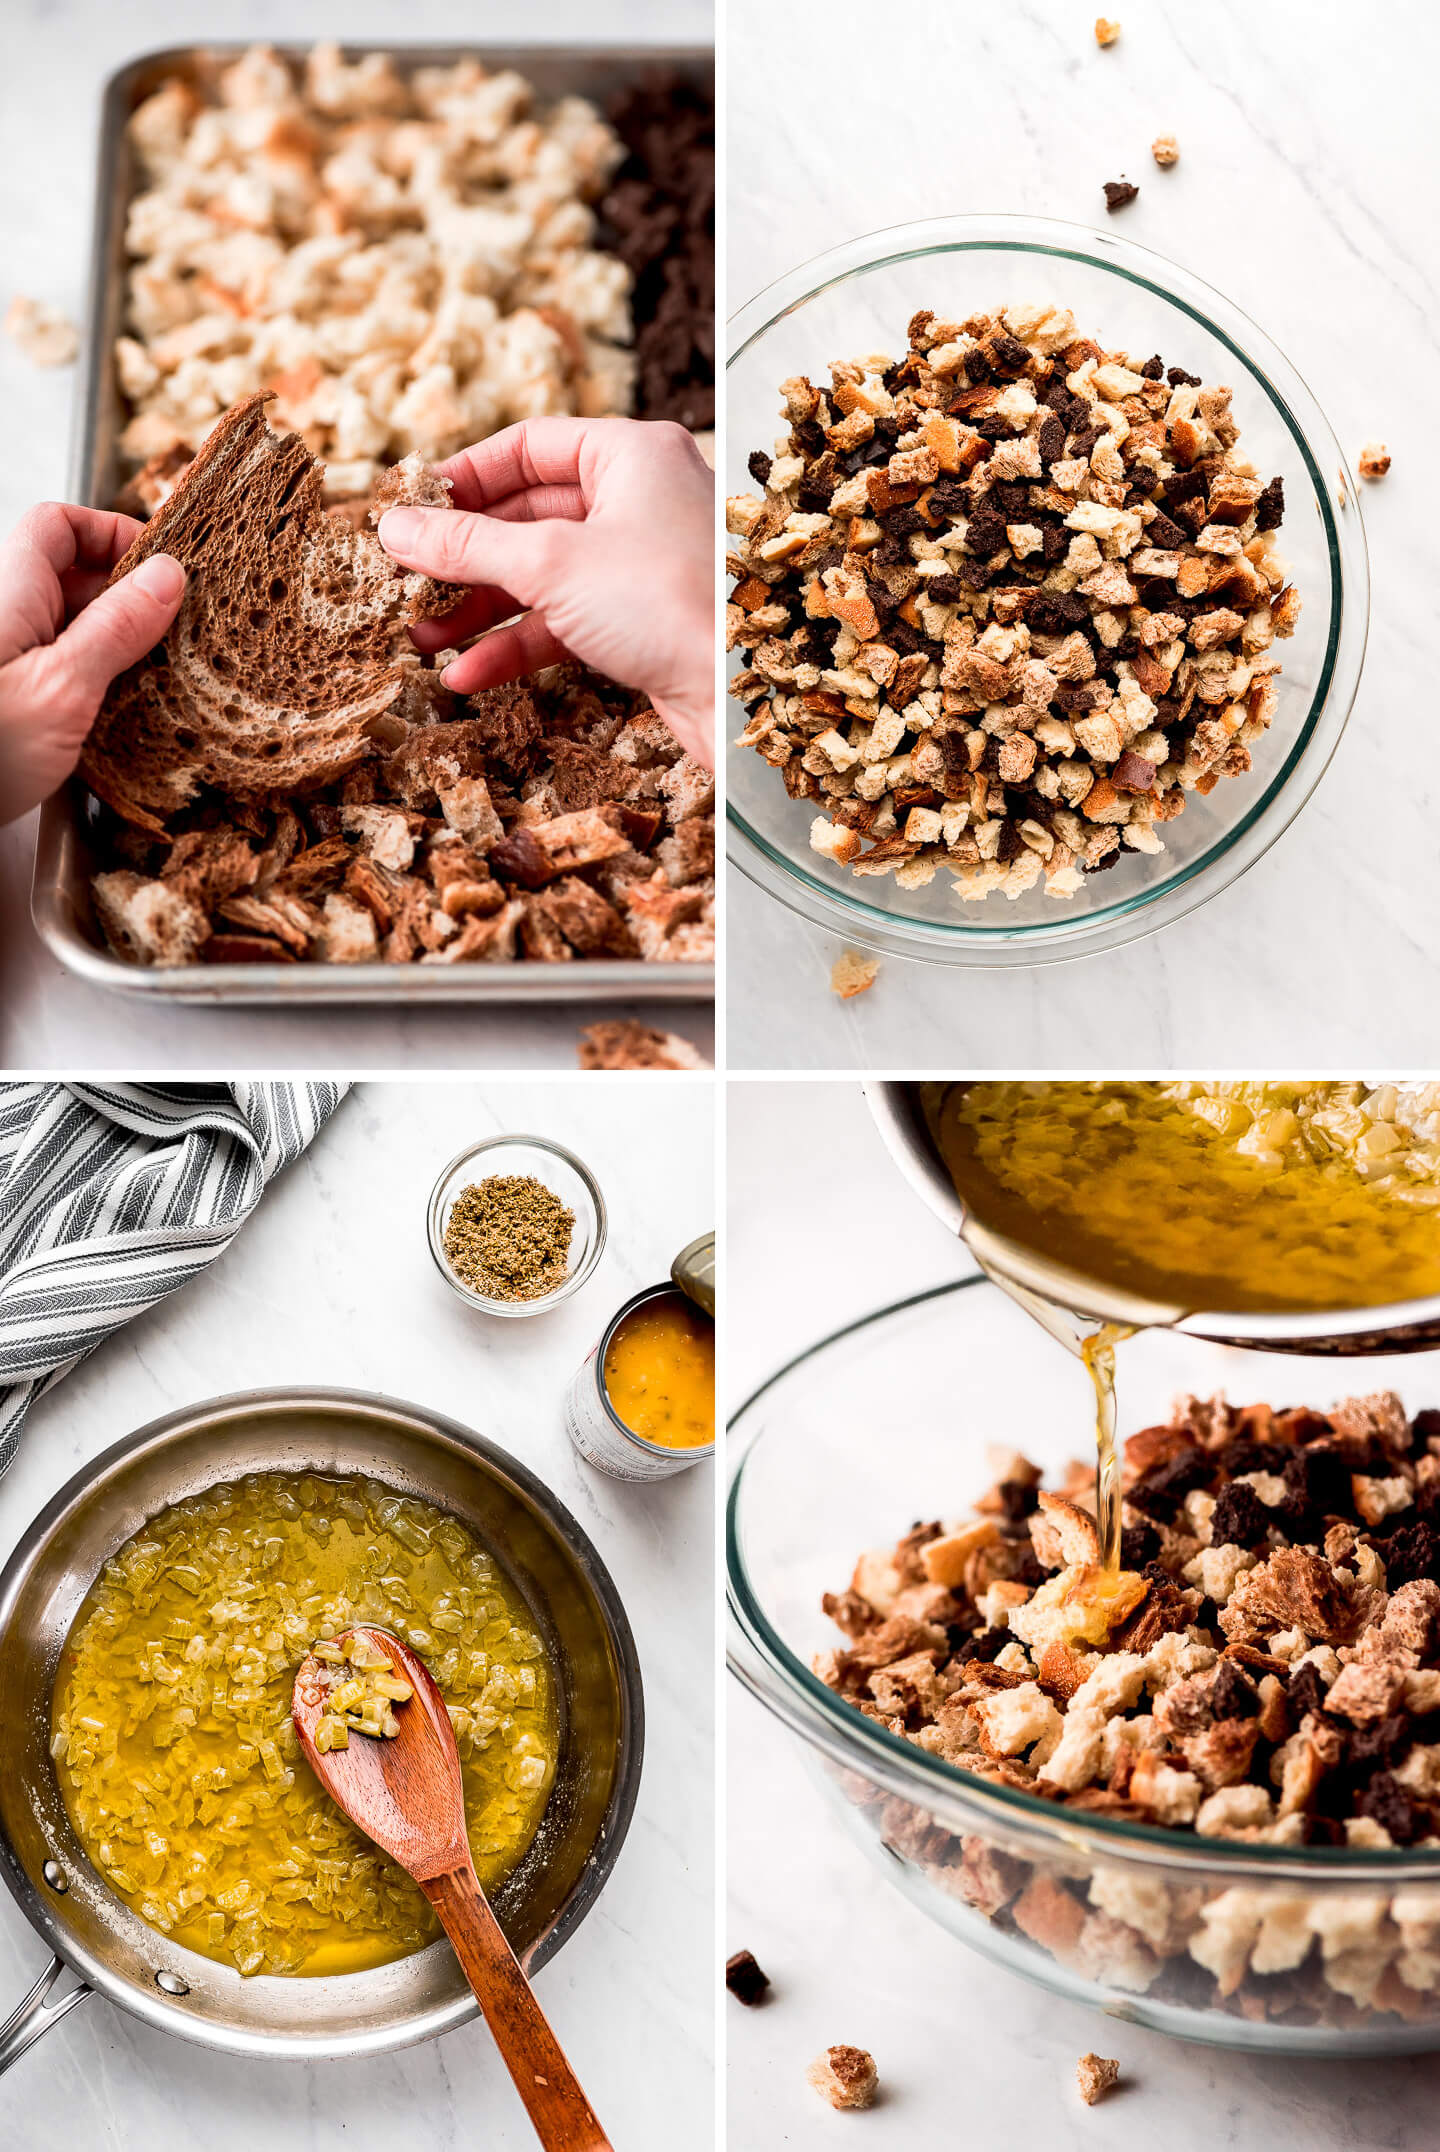 4 photos: tearing bread; various torn bread in a bowl, a pan of cooked celery and onions in butter; pouring melted butter over dried bread pieces.